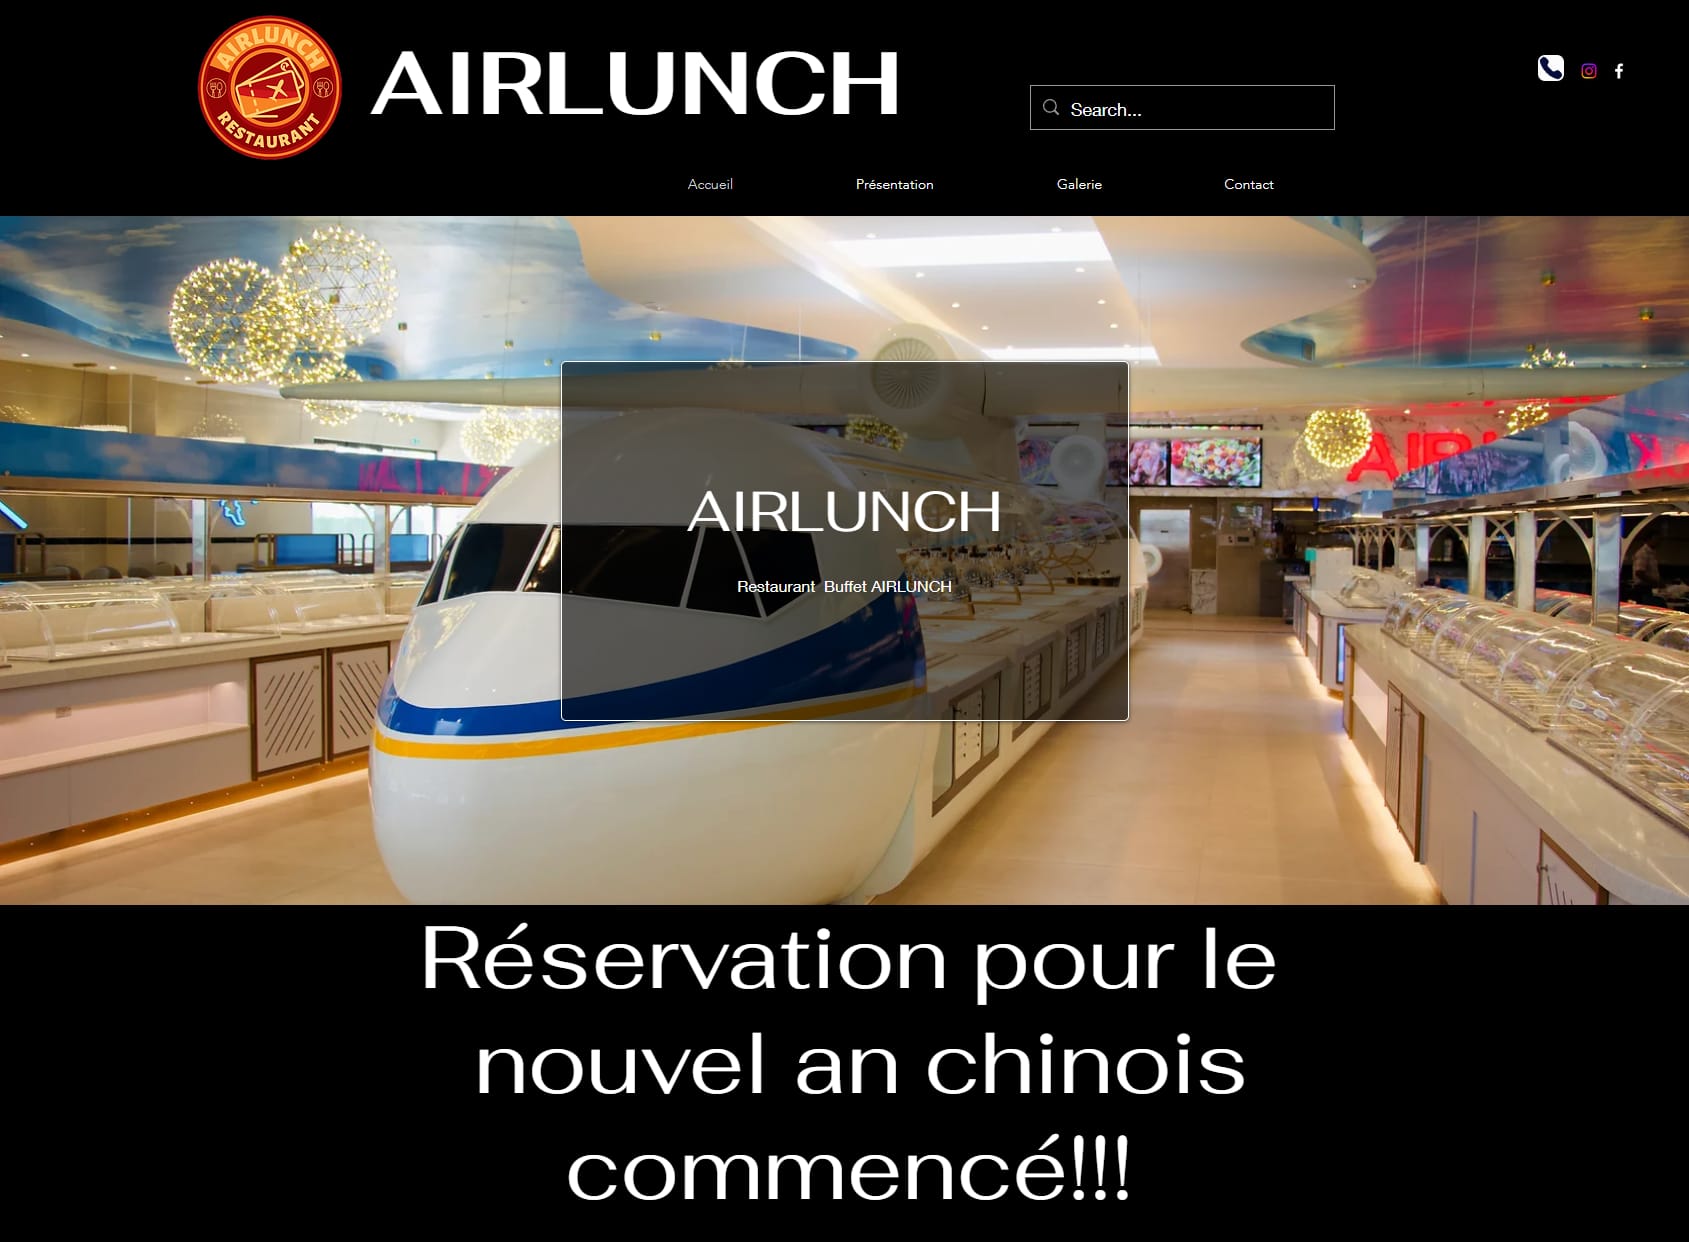 Airlunch